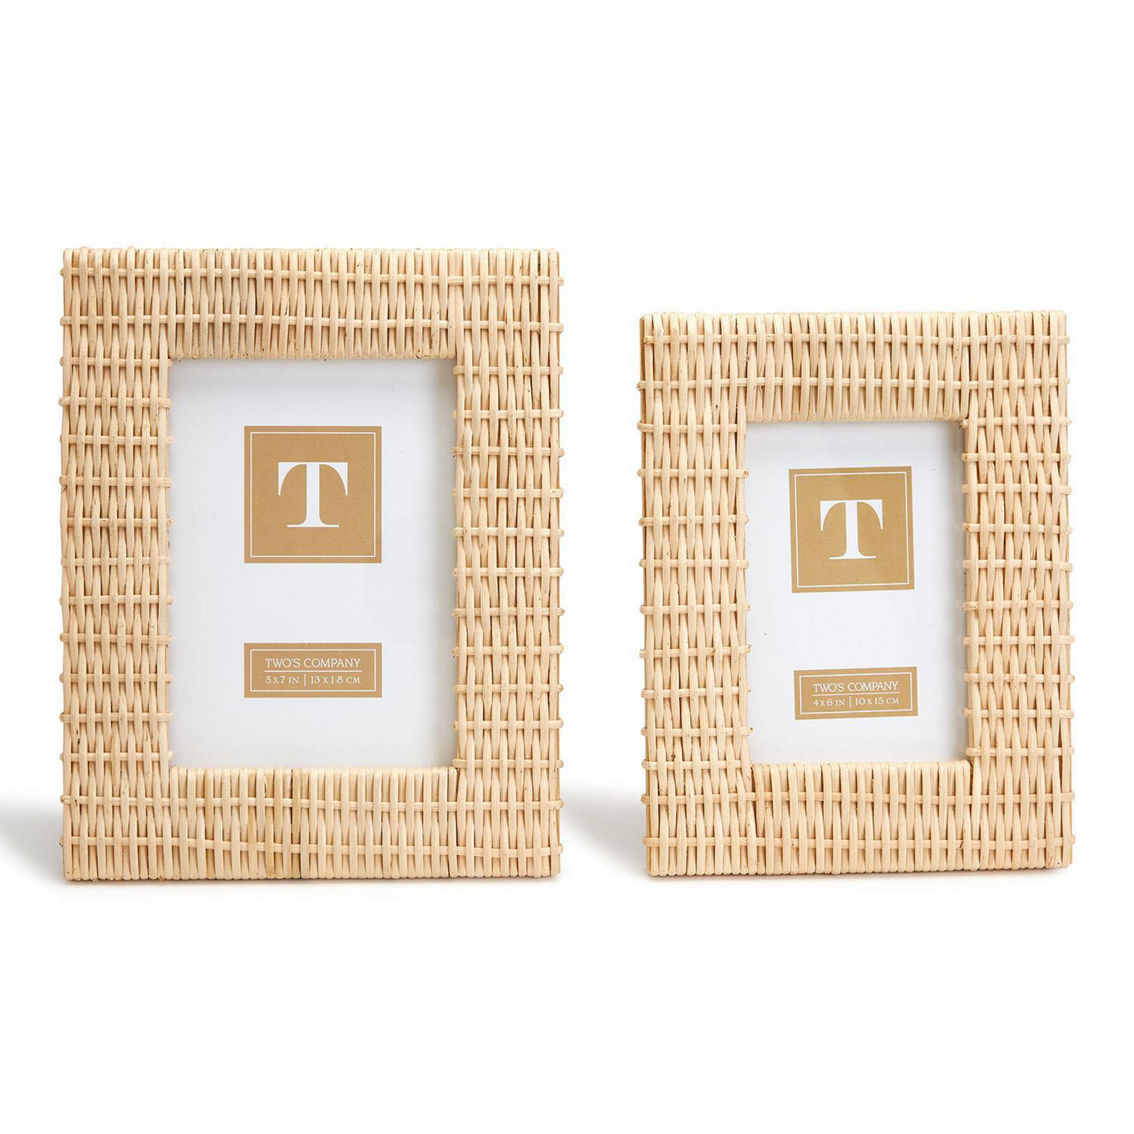 Two's Company Criss Cross Weave Set of 2 Photo Frame - Image 2 of 4